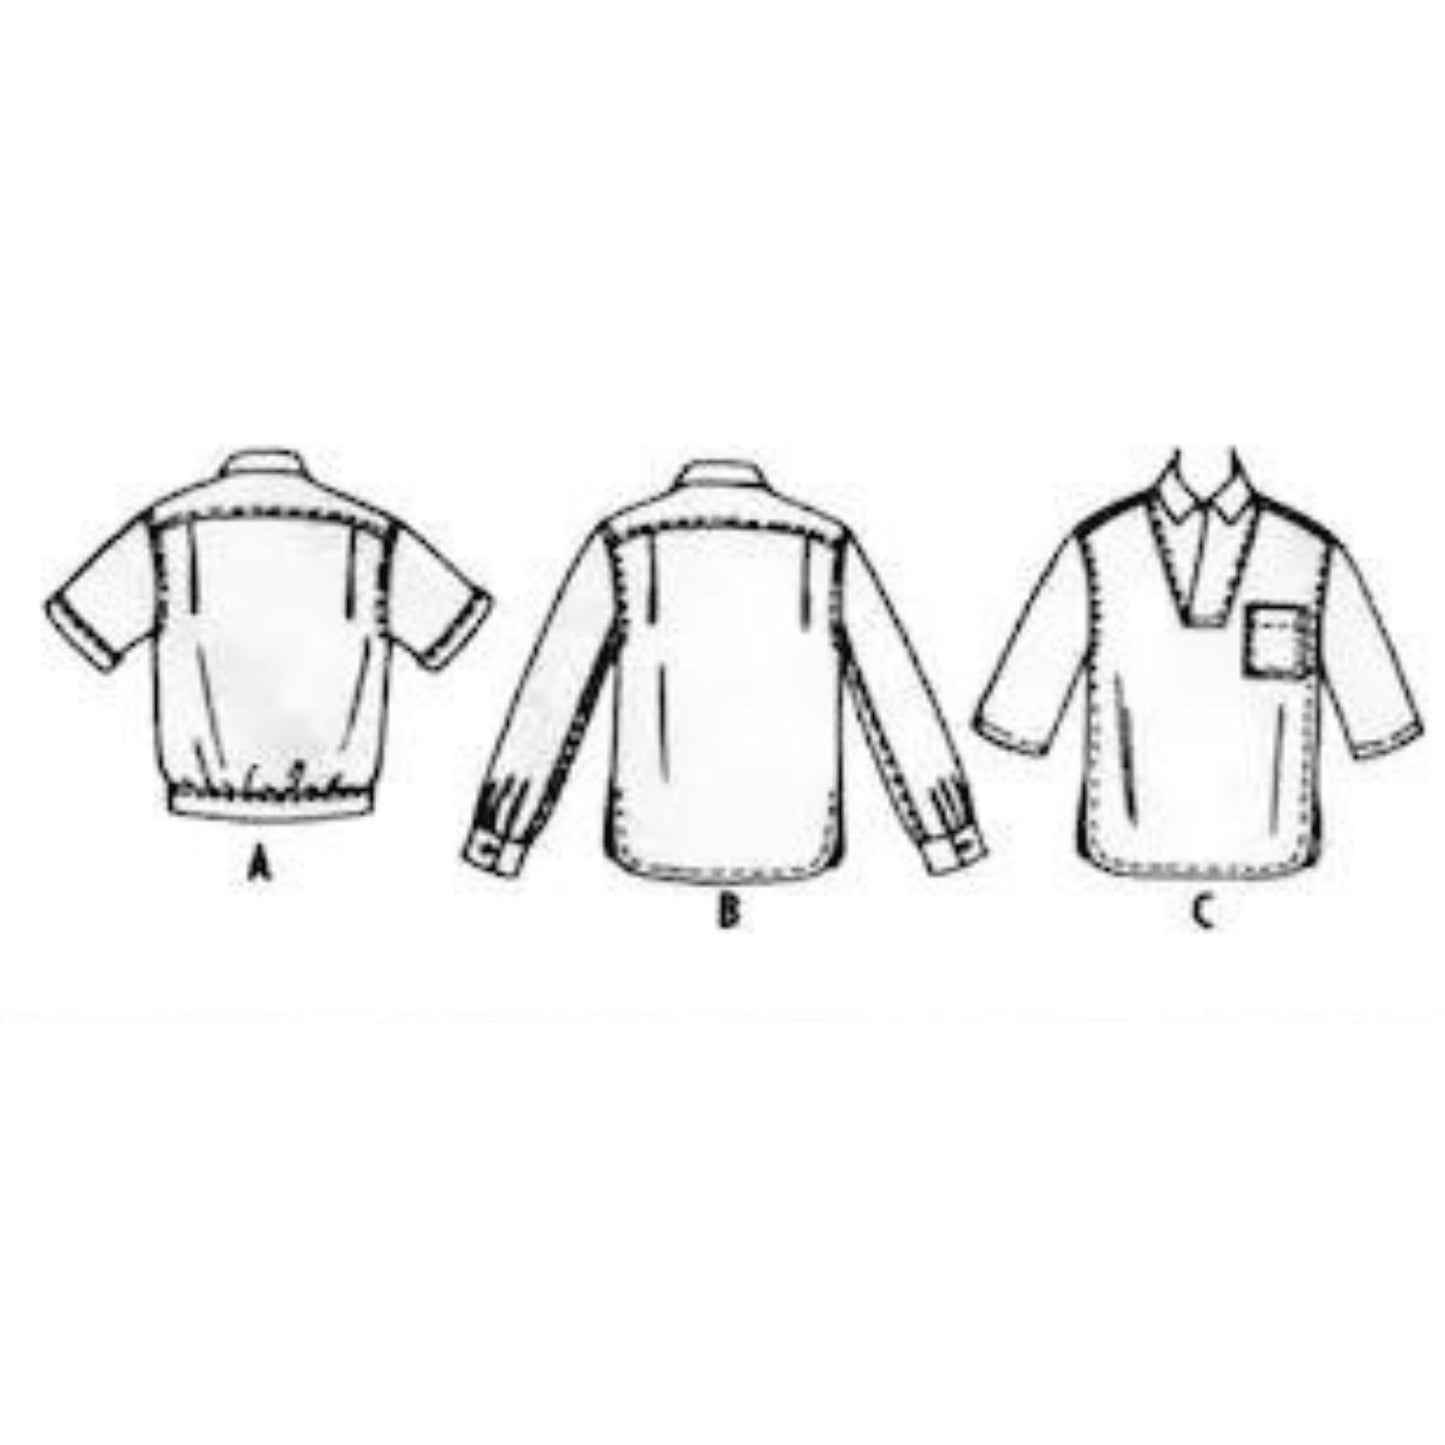 1950s Pattern, Men's Sports Shirt in Three Styles - lined drawing